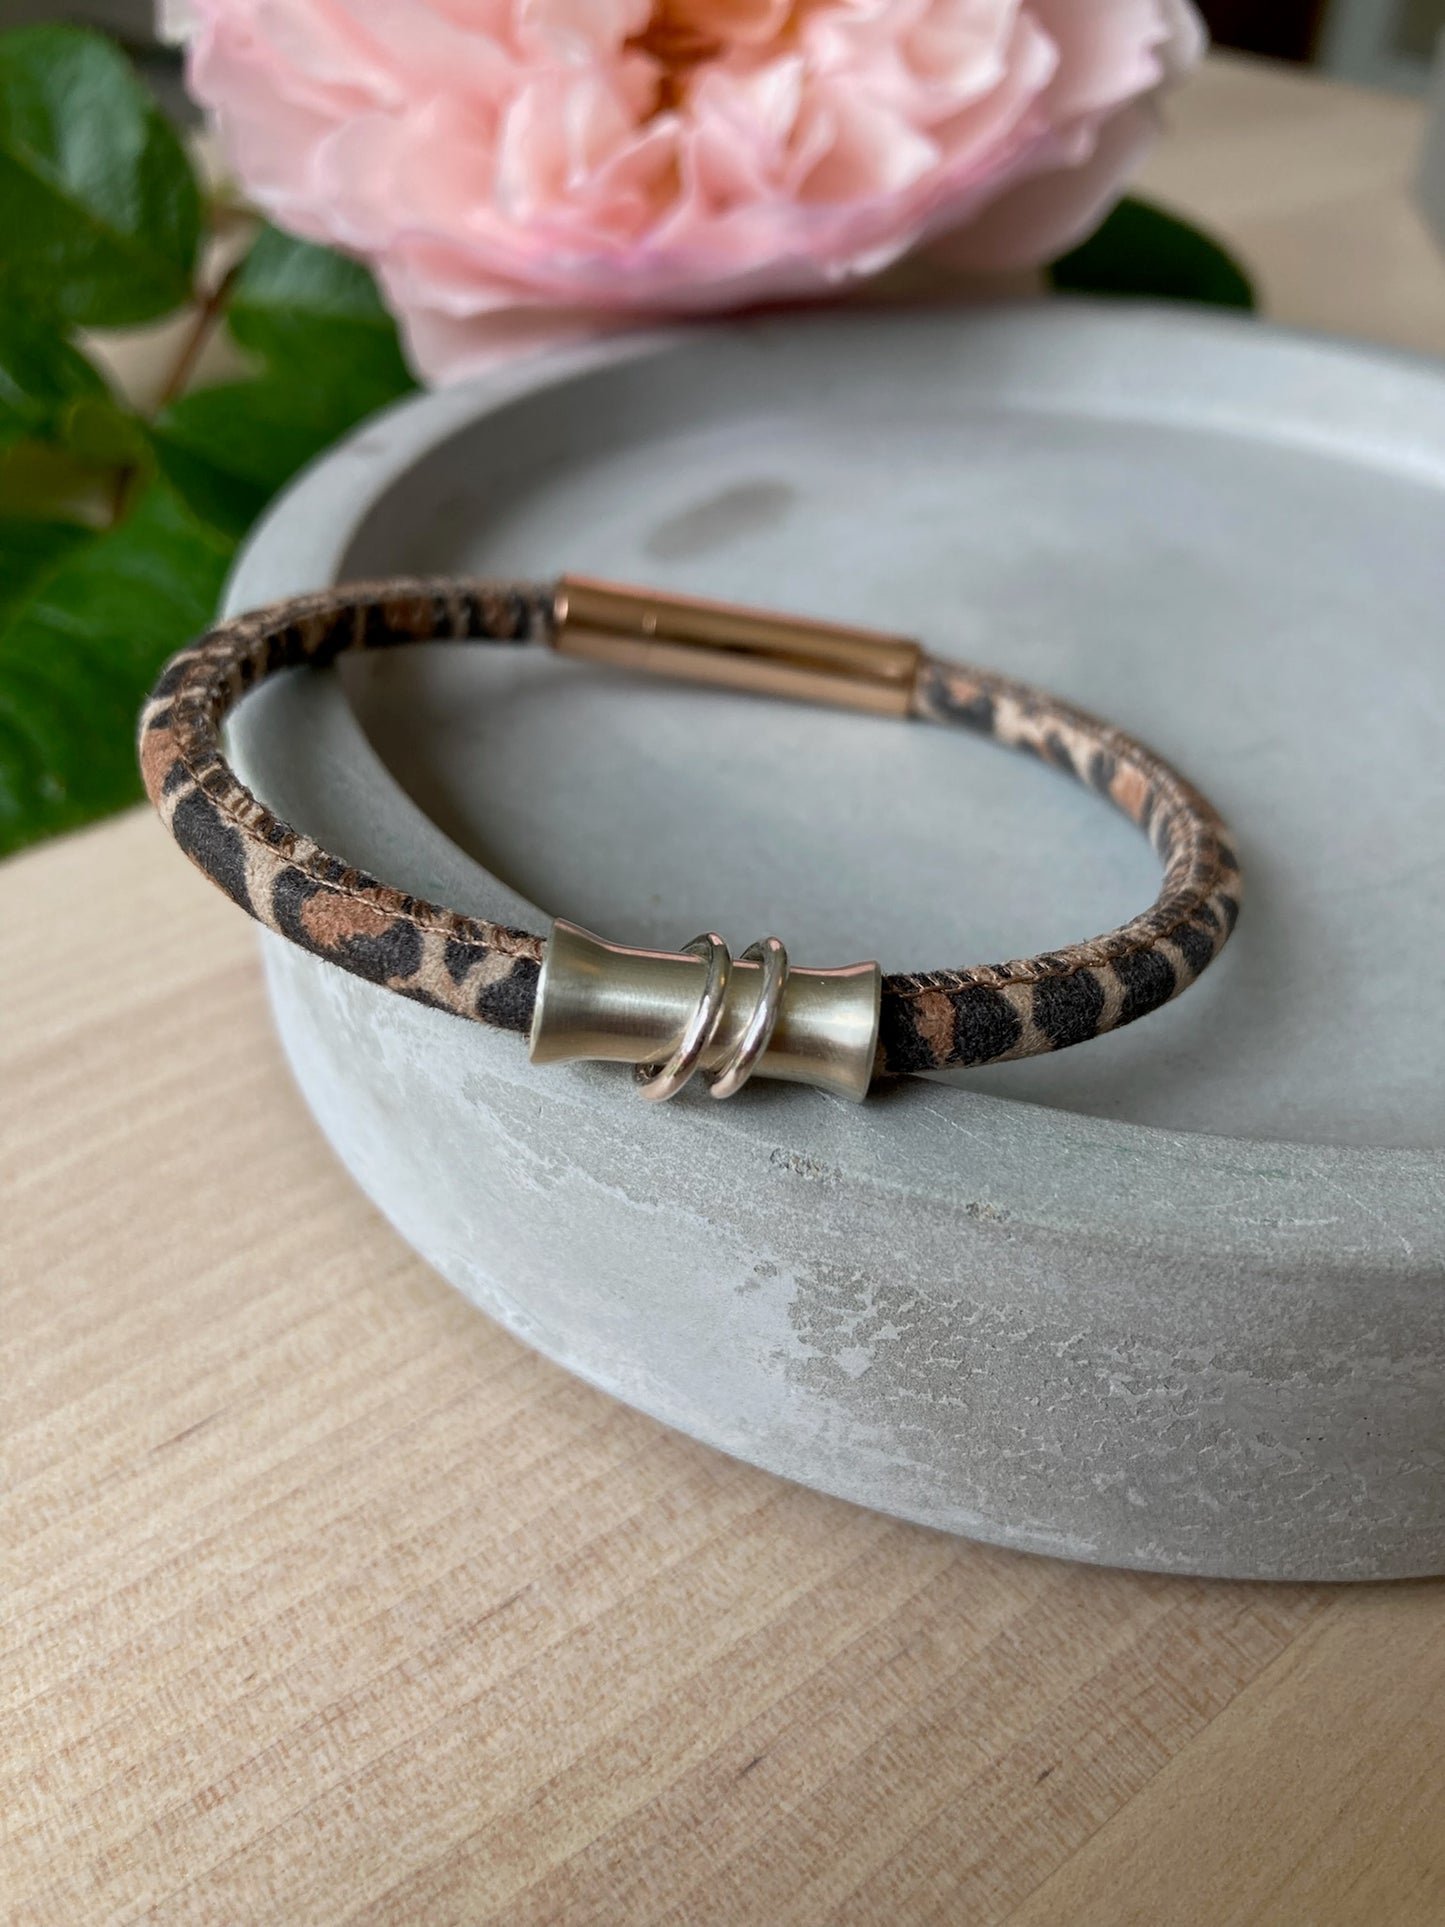 Leopard print leather bracelet with rings